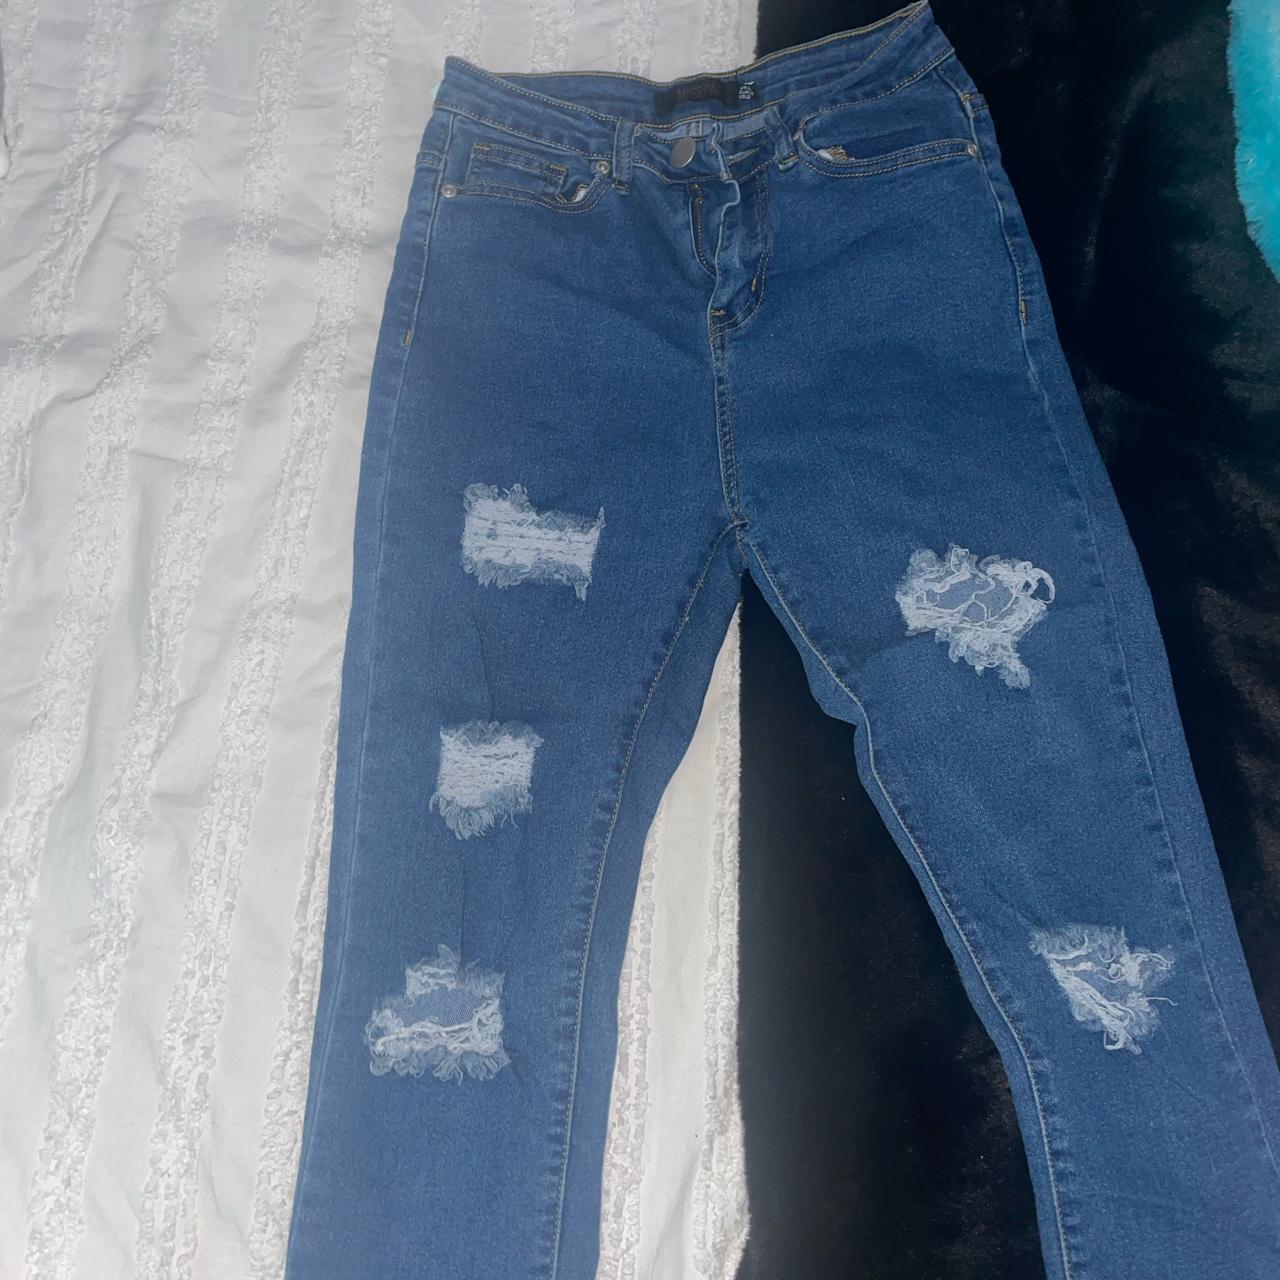 Mispap ripped jeans -too small for me -size 6... - Depop